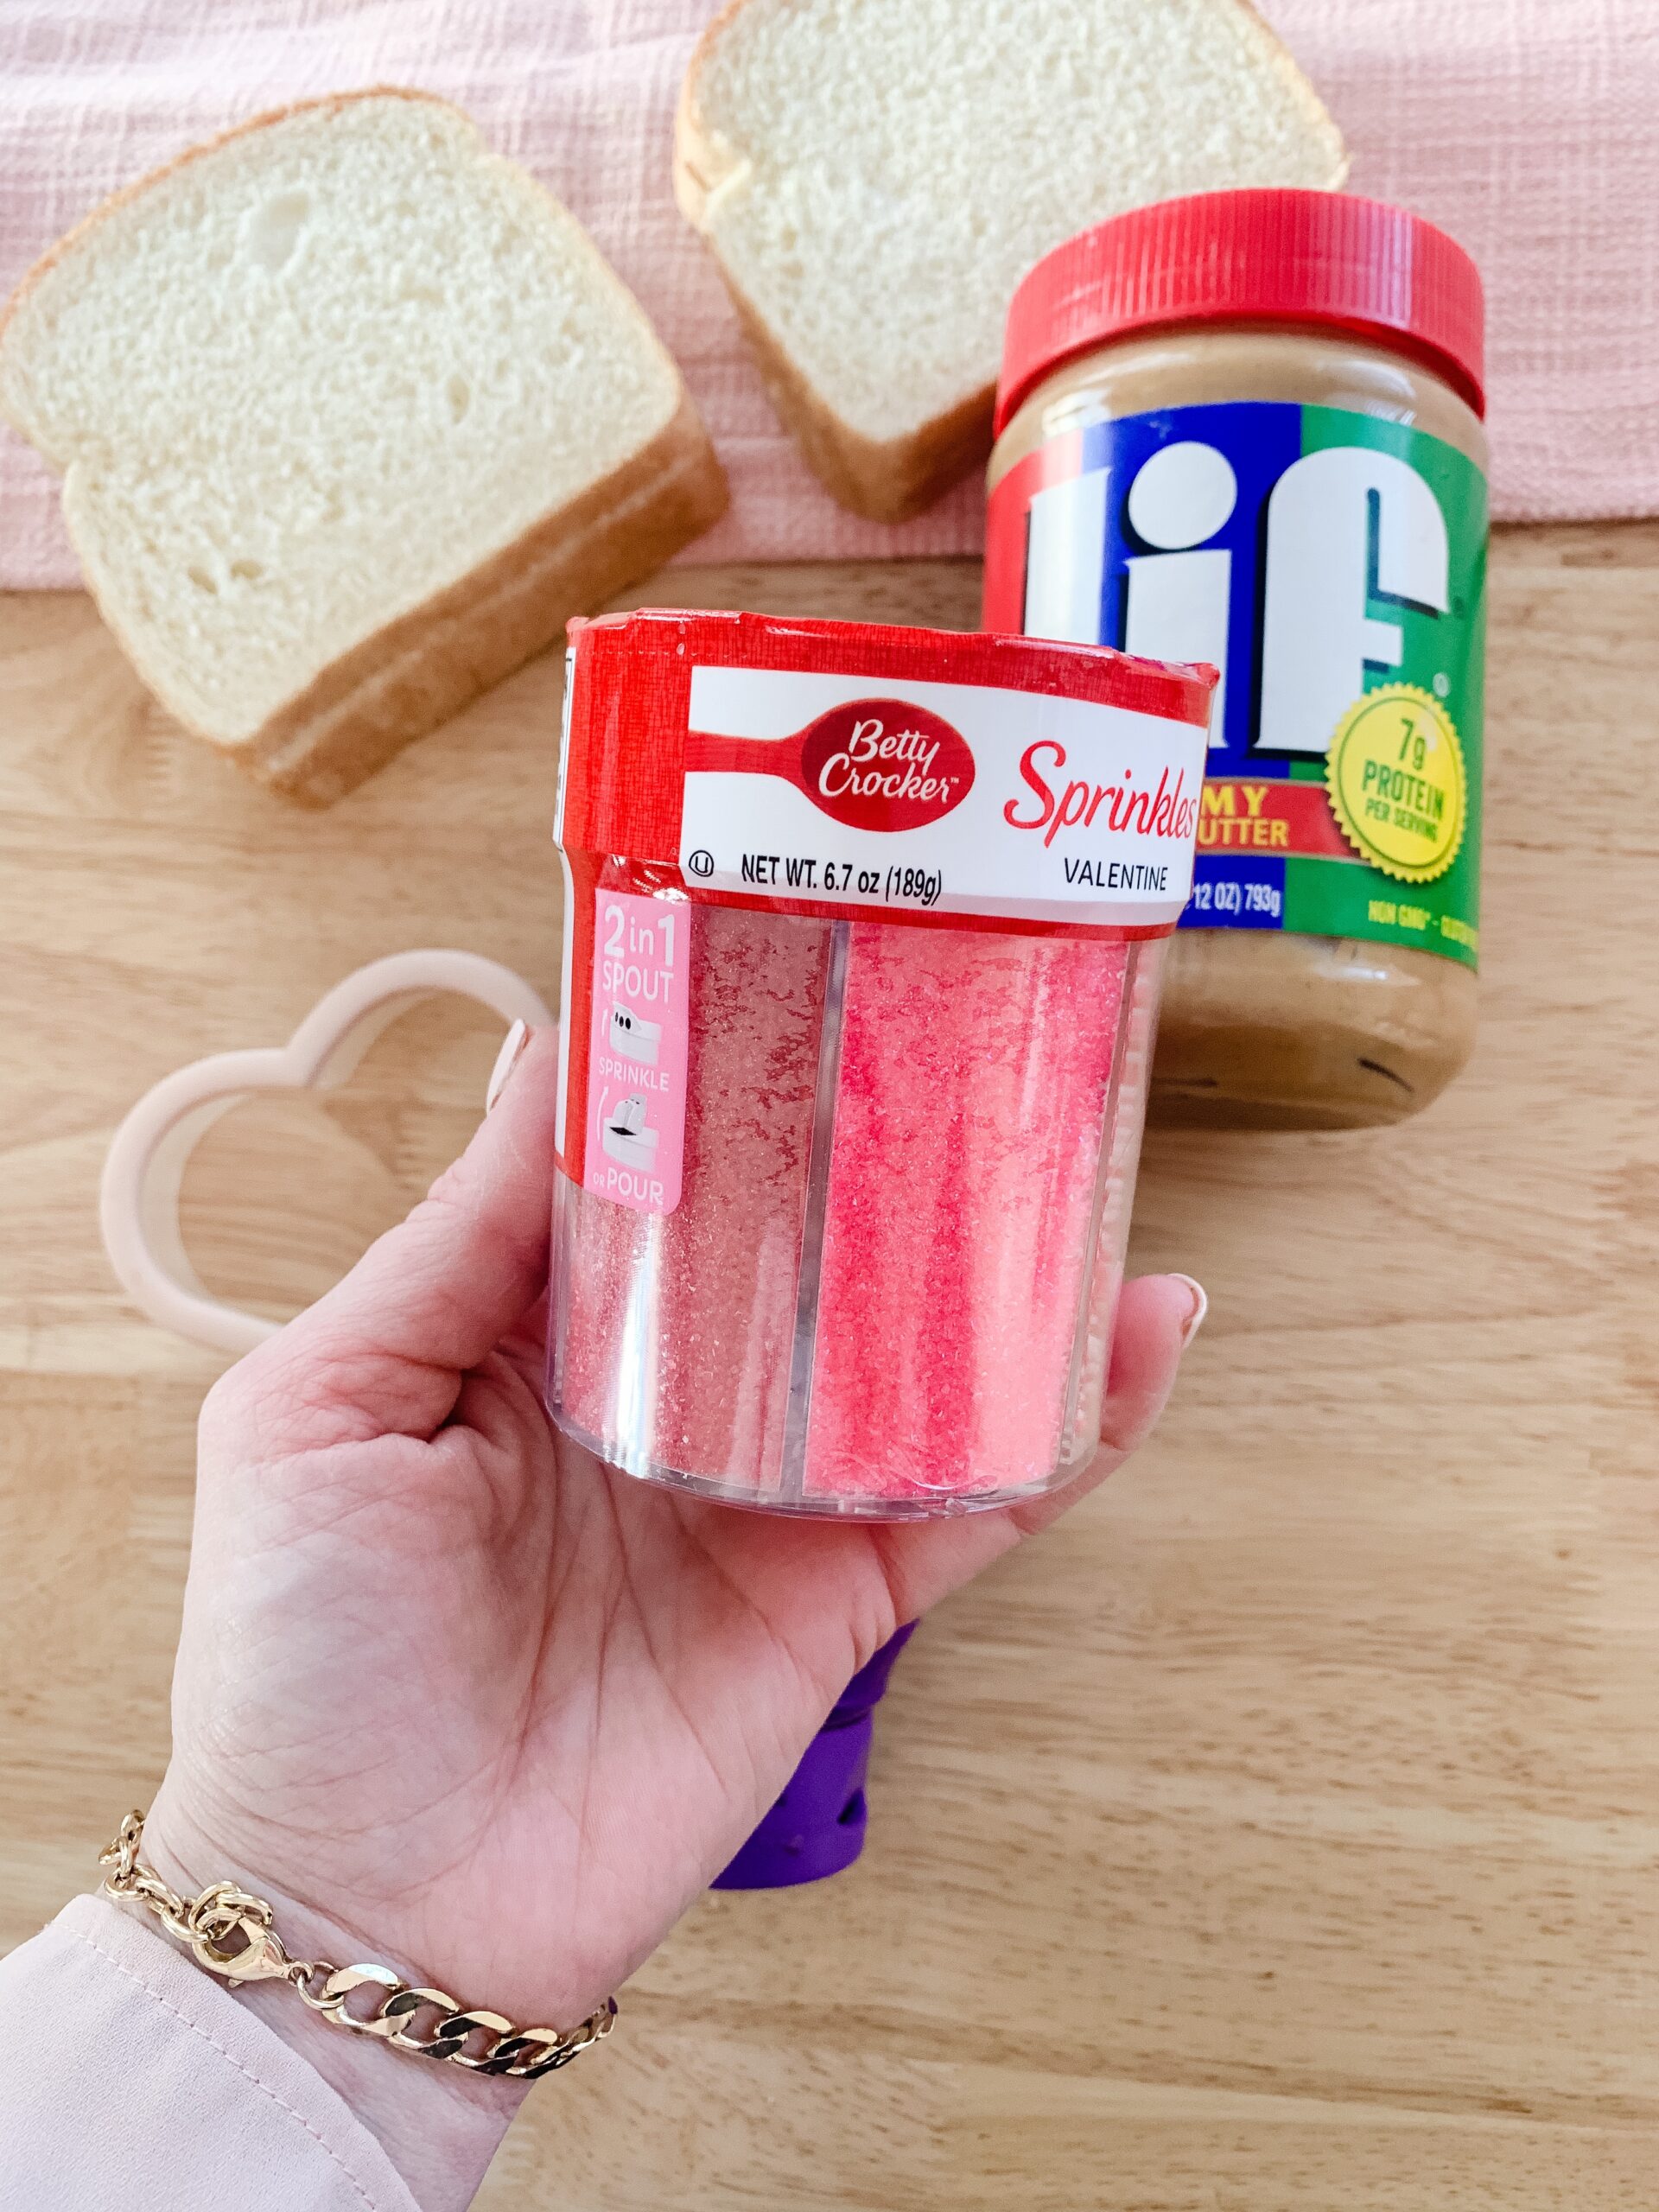 Making Valentine's Day peanut butter and jelly sandwiches